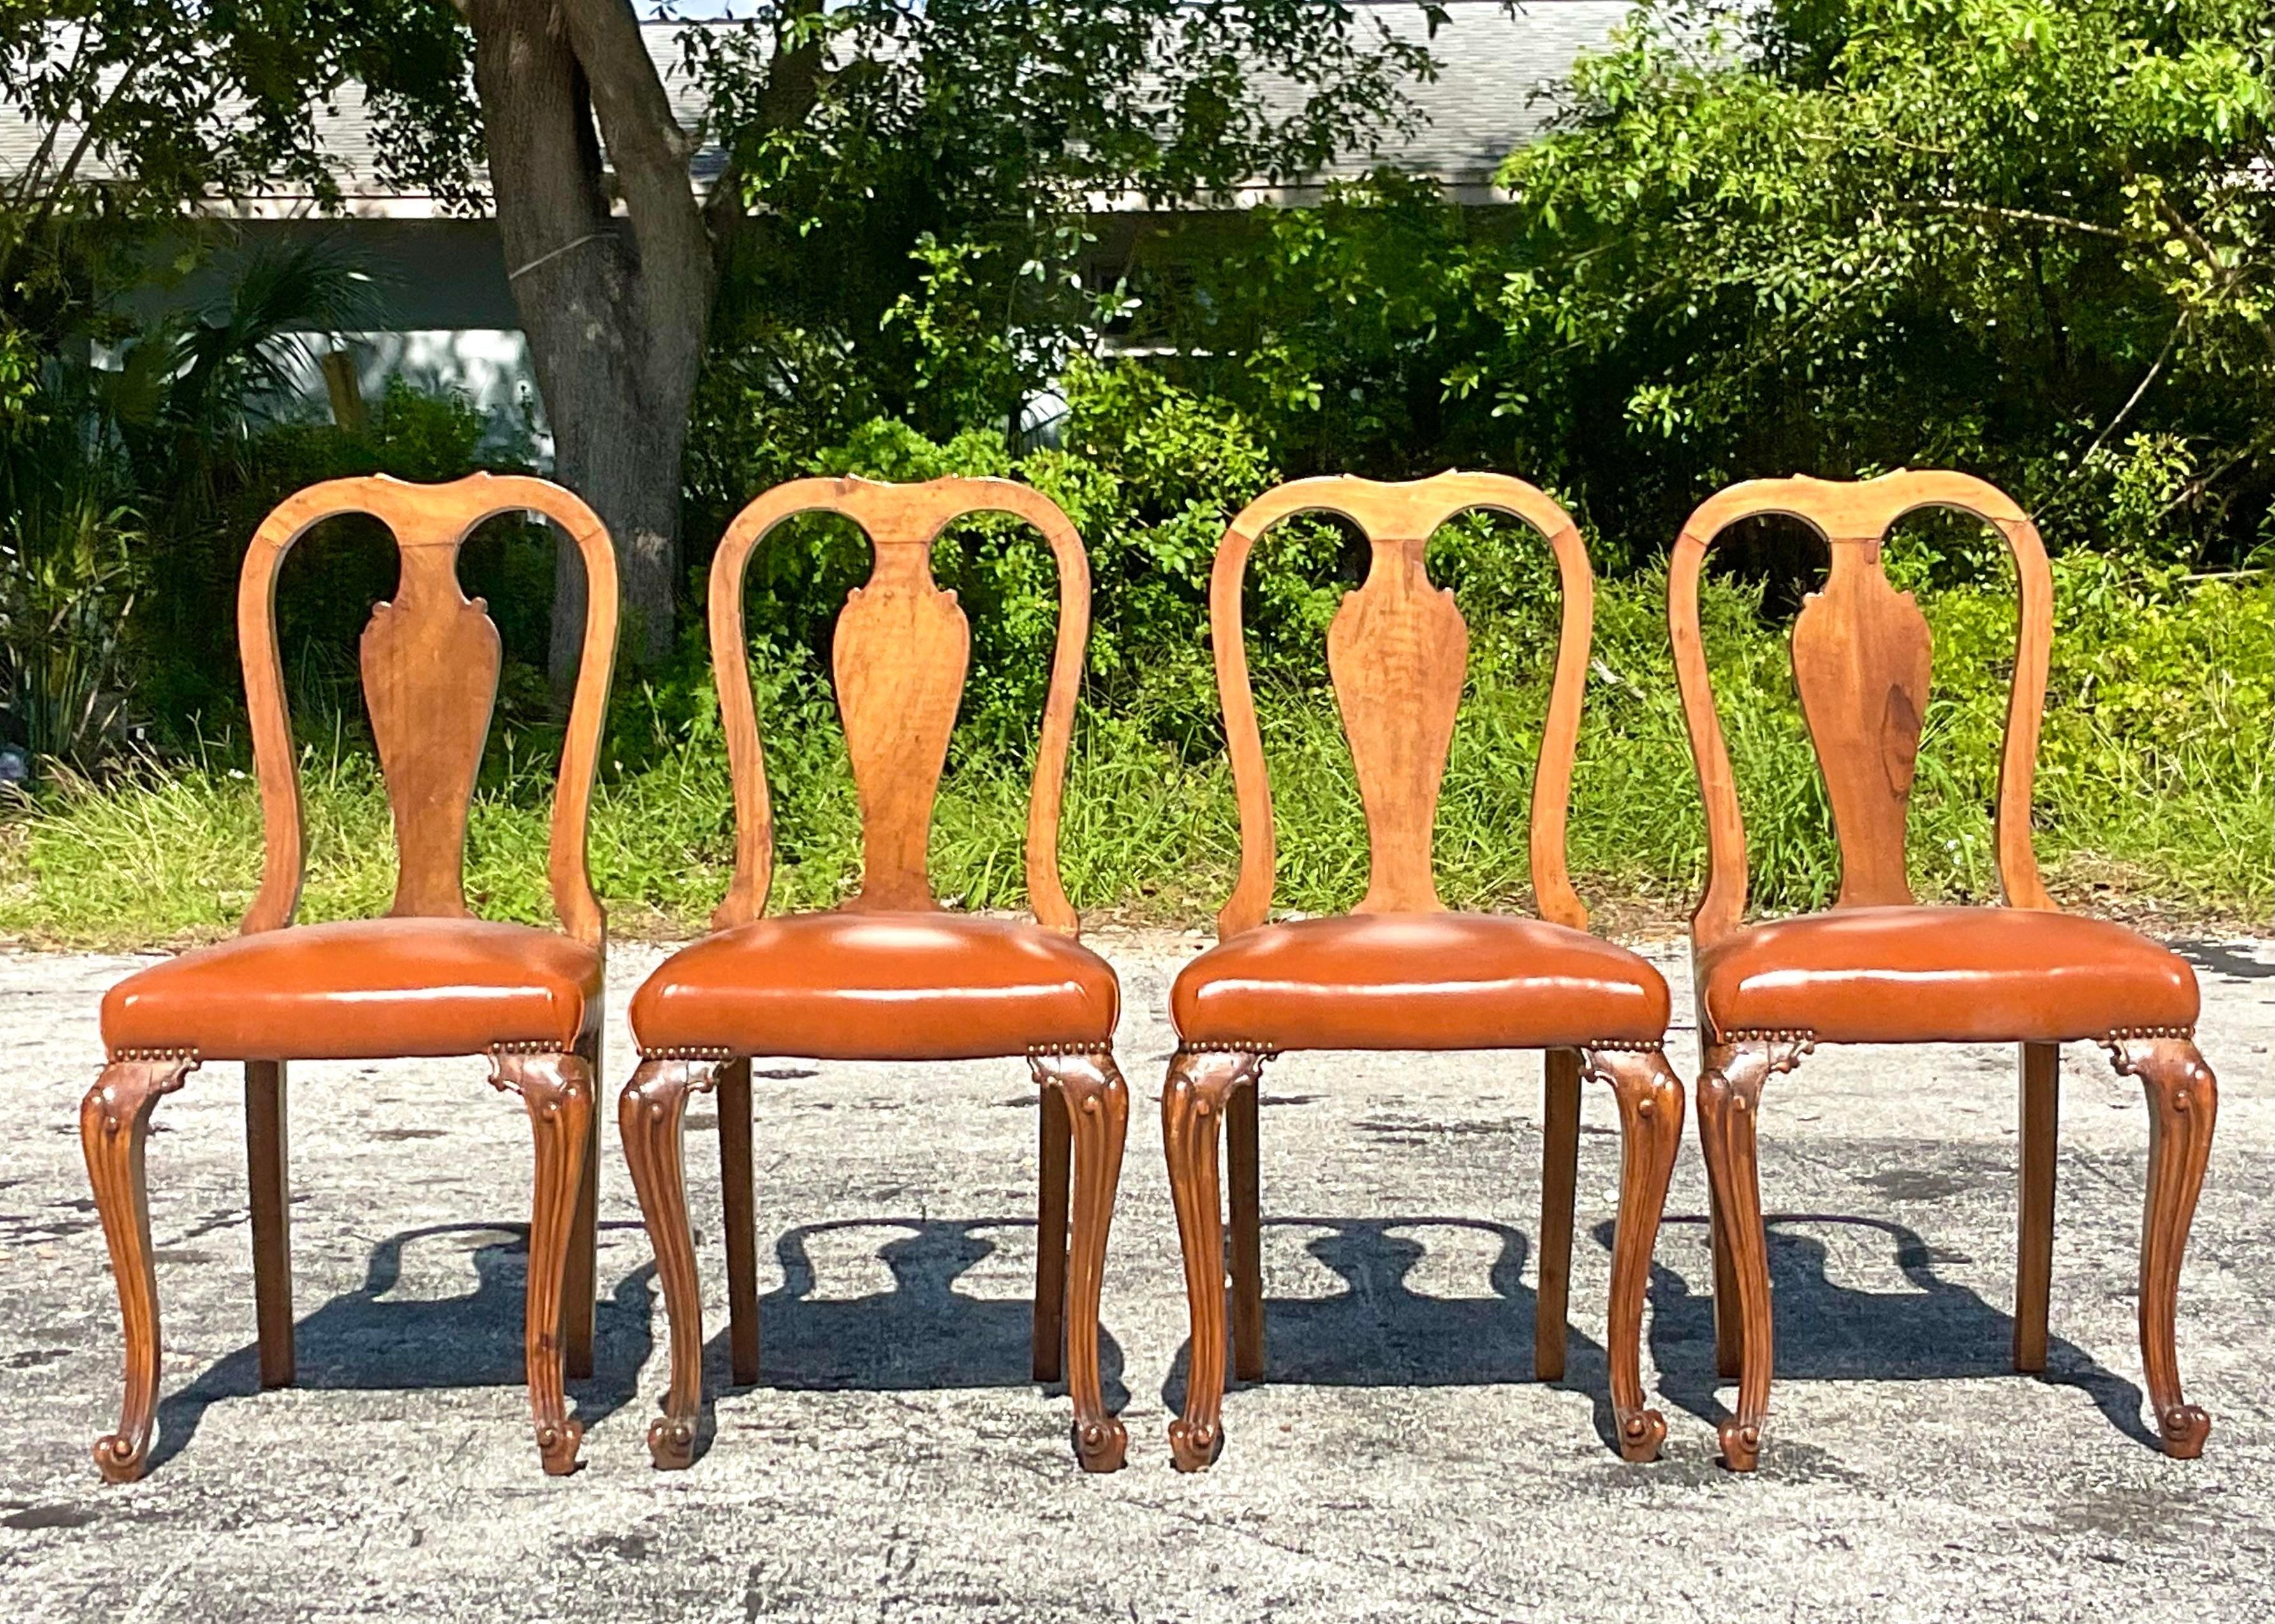 A magnificent set of four vintage Regency dining chairs. Chic high back burl wood design with carved cabriolet legs. Newly reupholstered with a caramel leather seat. Acquired from a Palm Beach estate.